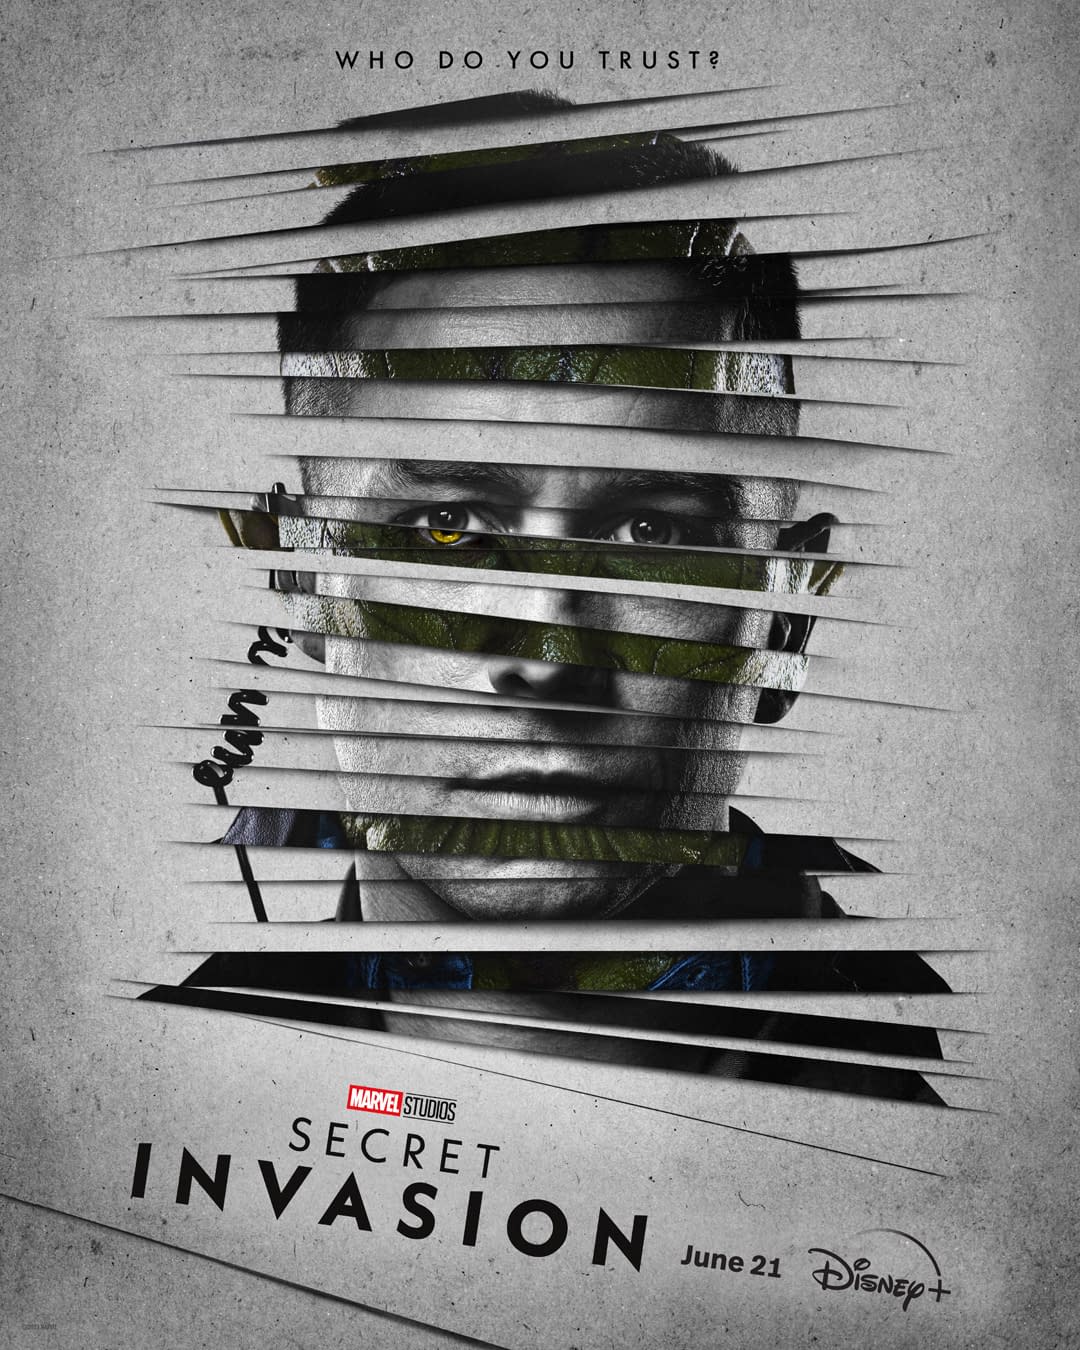 New 'Secret Invasion' Trailer And Character Posters Are Here